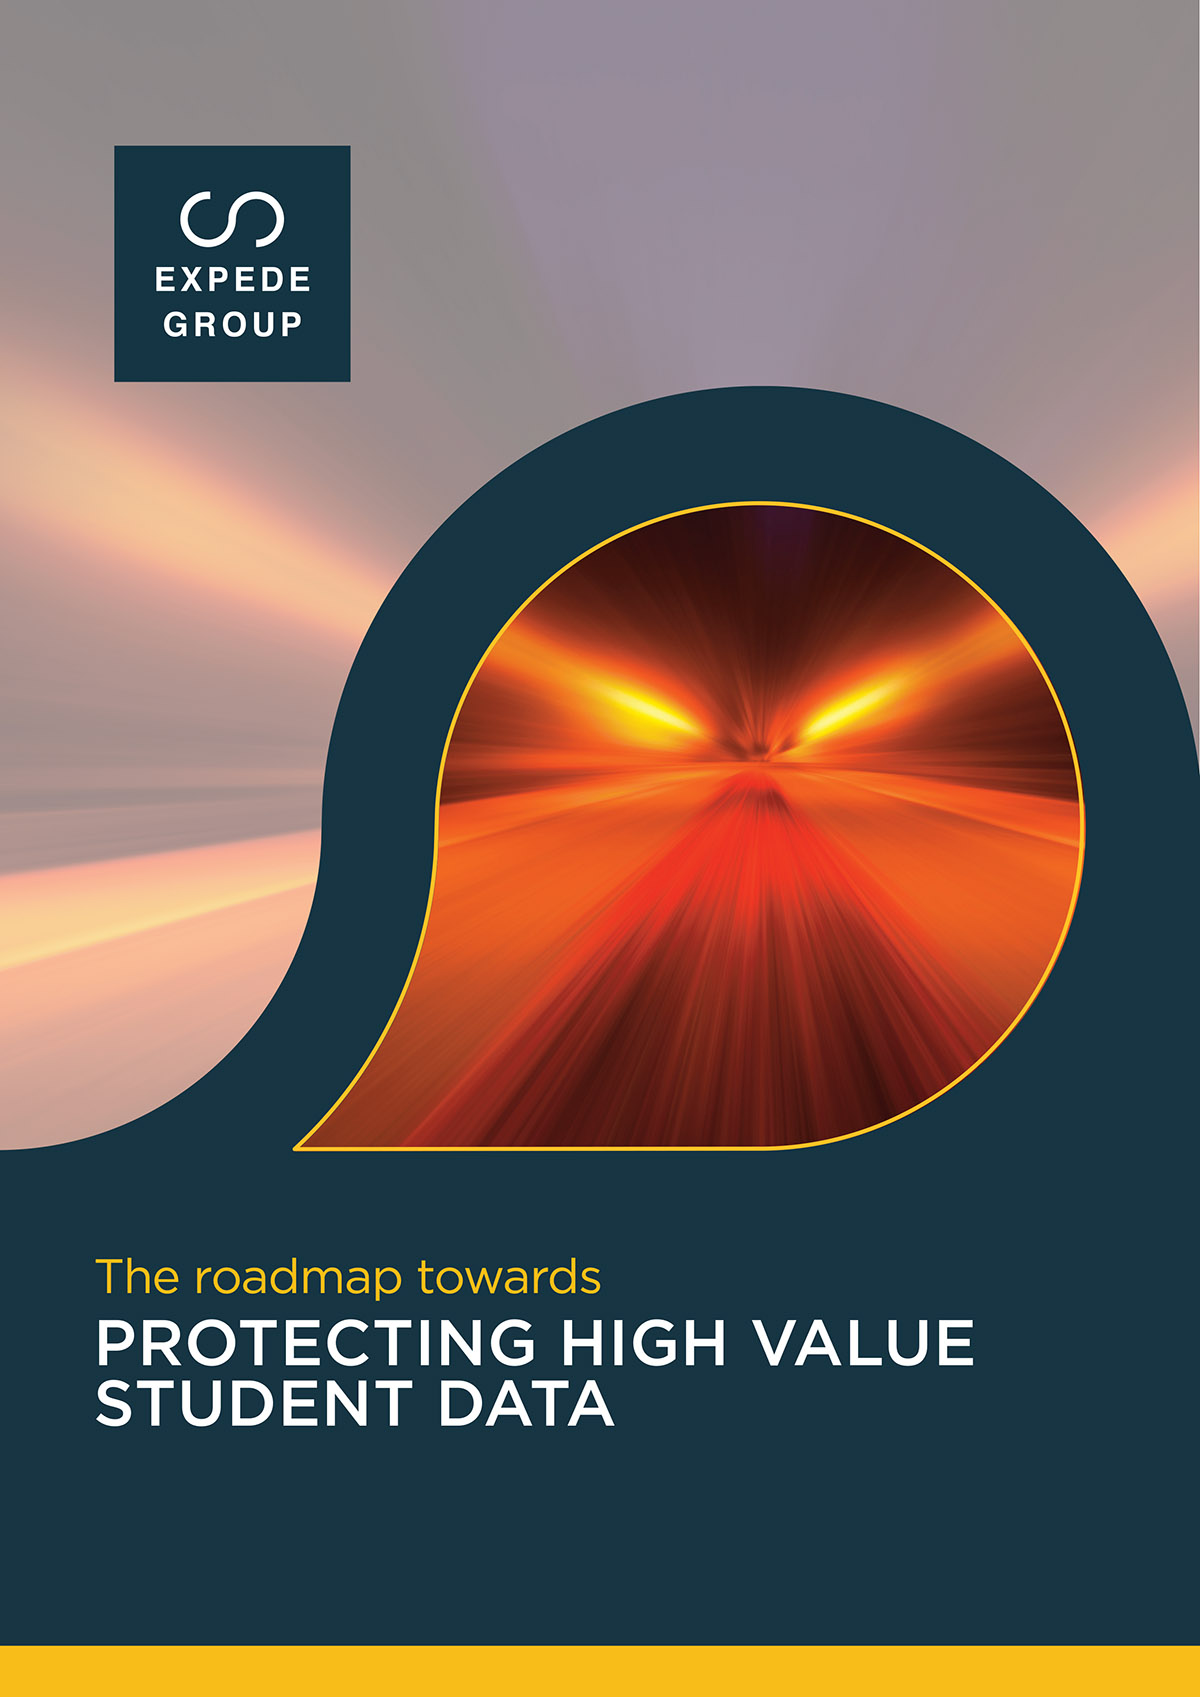 The roadmap towards protecting high value student data